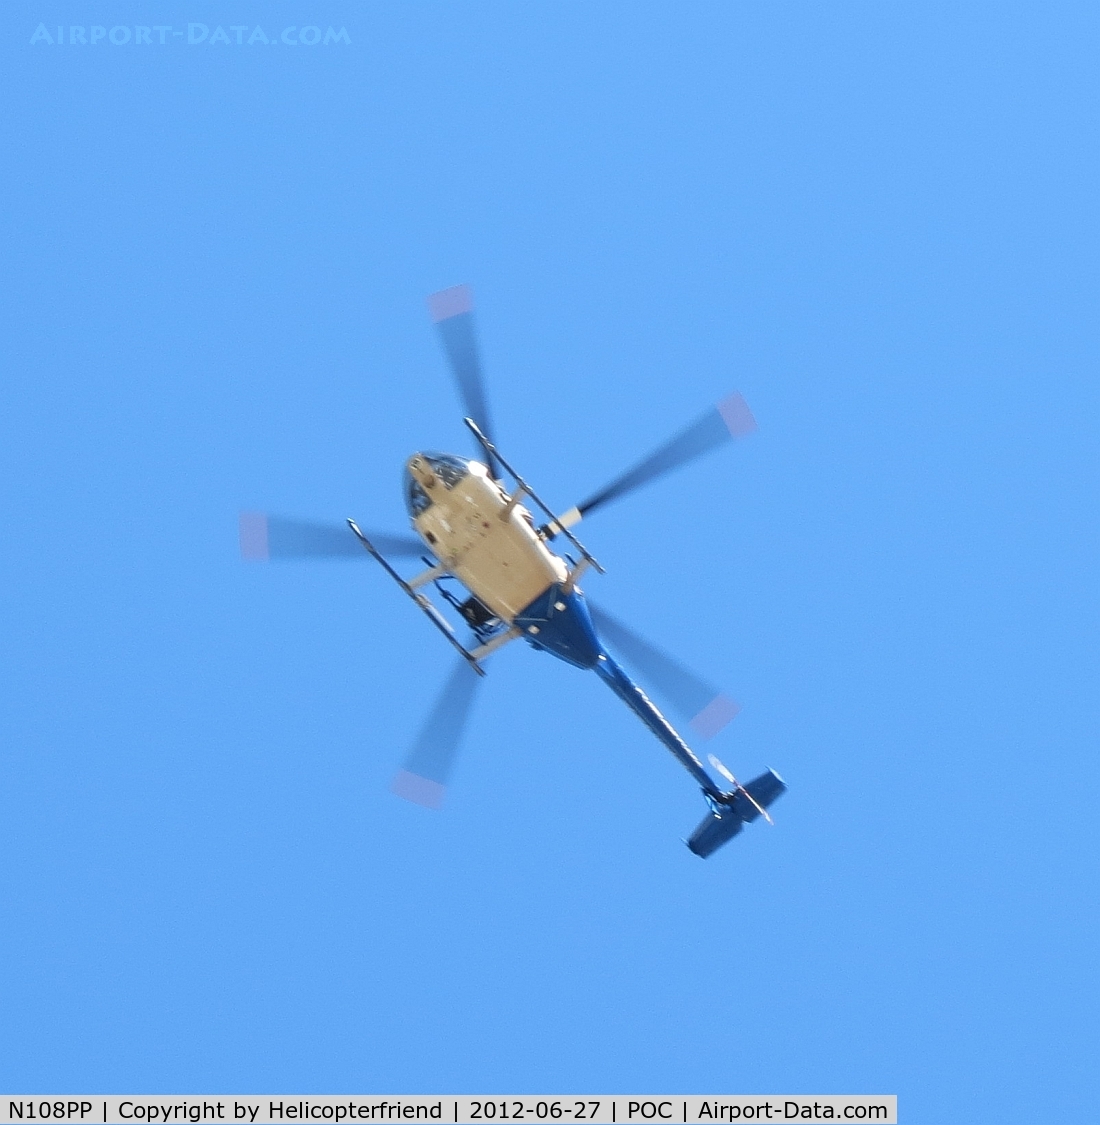 N108PP, 2008 MD Helicopters 369E C/N 0578E, Crossing active runways for downwind leg